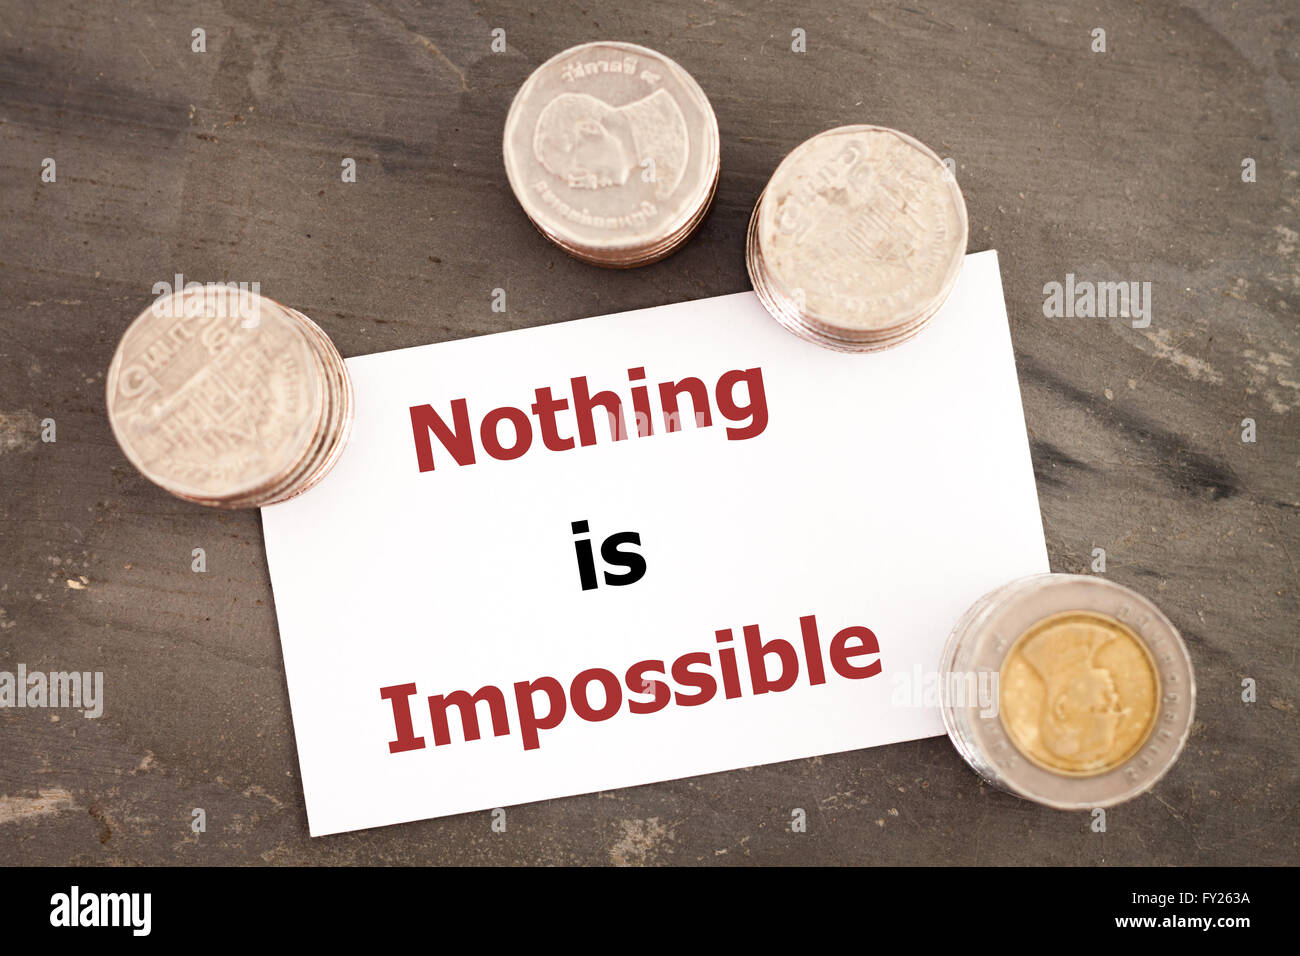 Nothing is impossible inspirational quote, stock photo Stock Photo